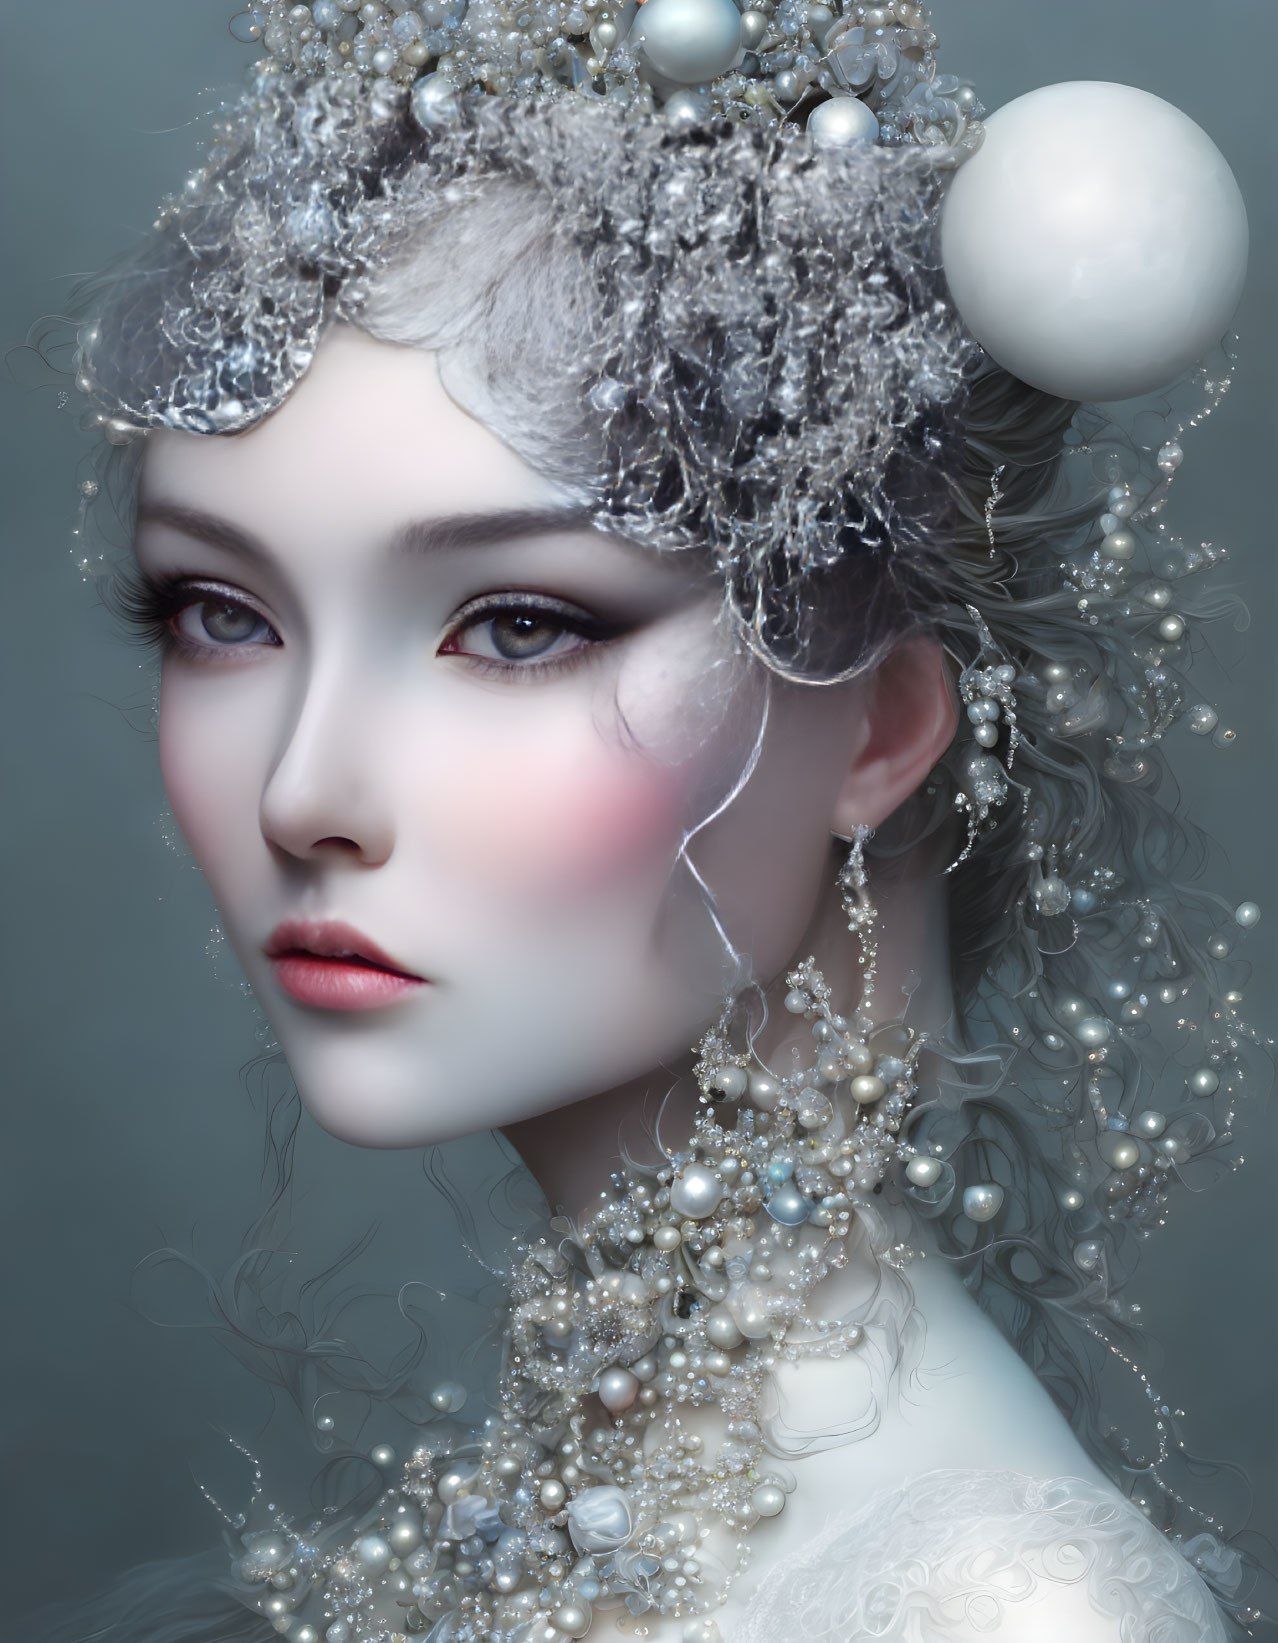 Ethereal makeup and silver headpiece on regal woman portrait